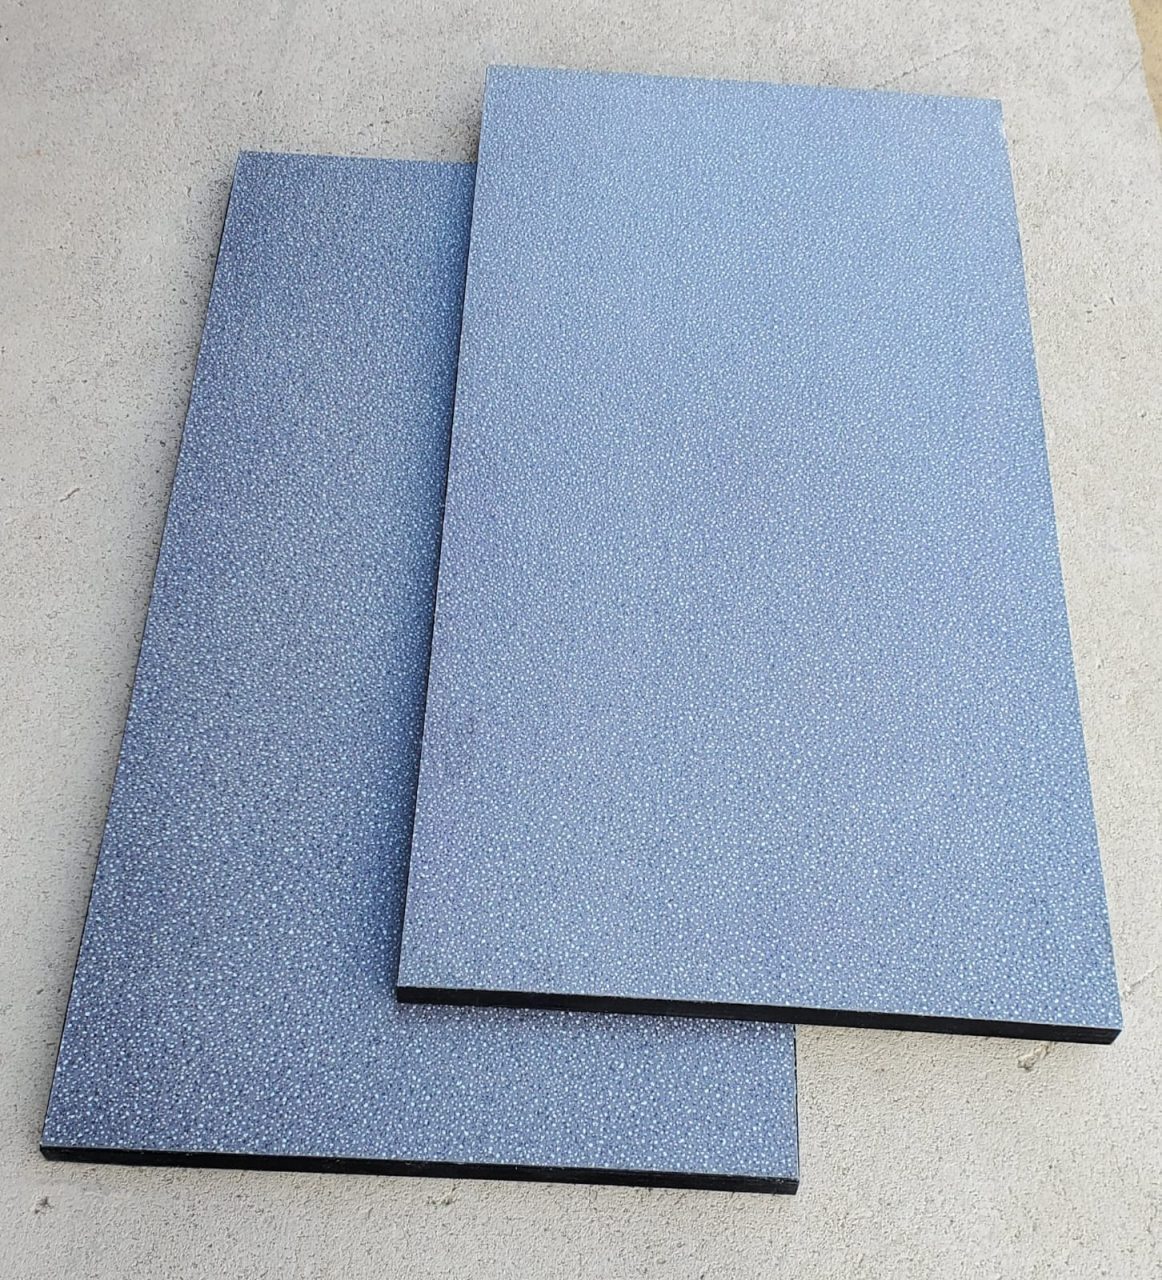 Anti Vibration Mats Mat Pads Ribbed Rubber Reducing Noise & Sound Deadening 